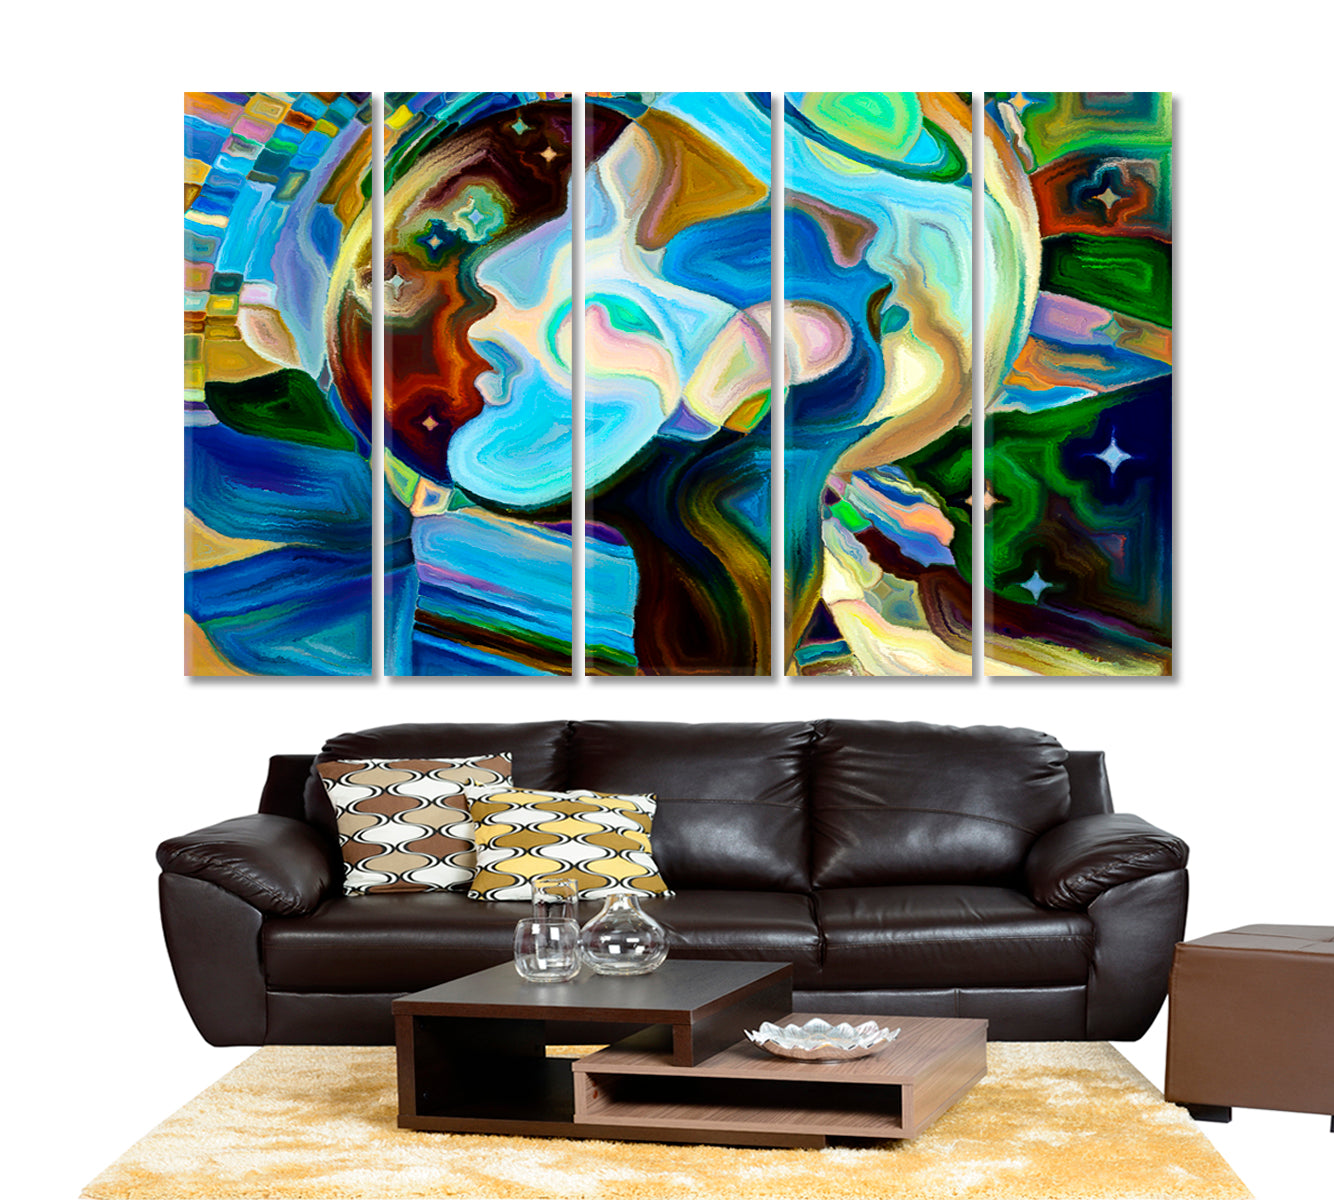 Looking Into Universe Consciousness Art Artesty 5 panels 36" x 24" 